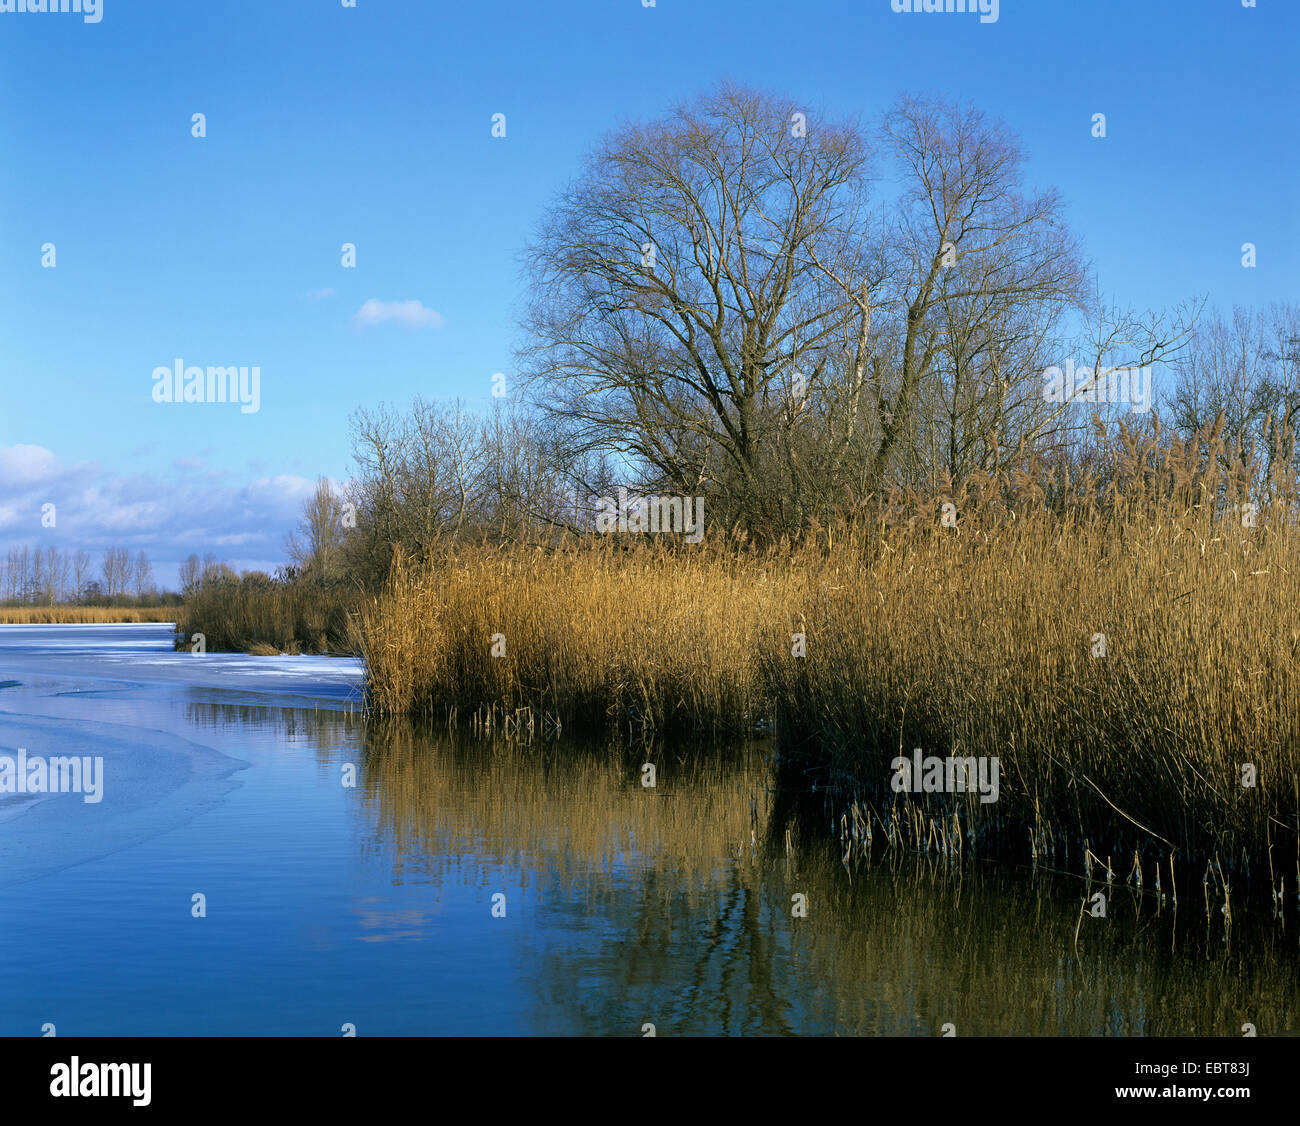 pond landscape with reed and willow in winter, Germany, Naturschutzgebiet Herbslebener Teiche Stock Photo